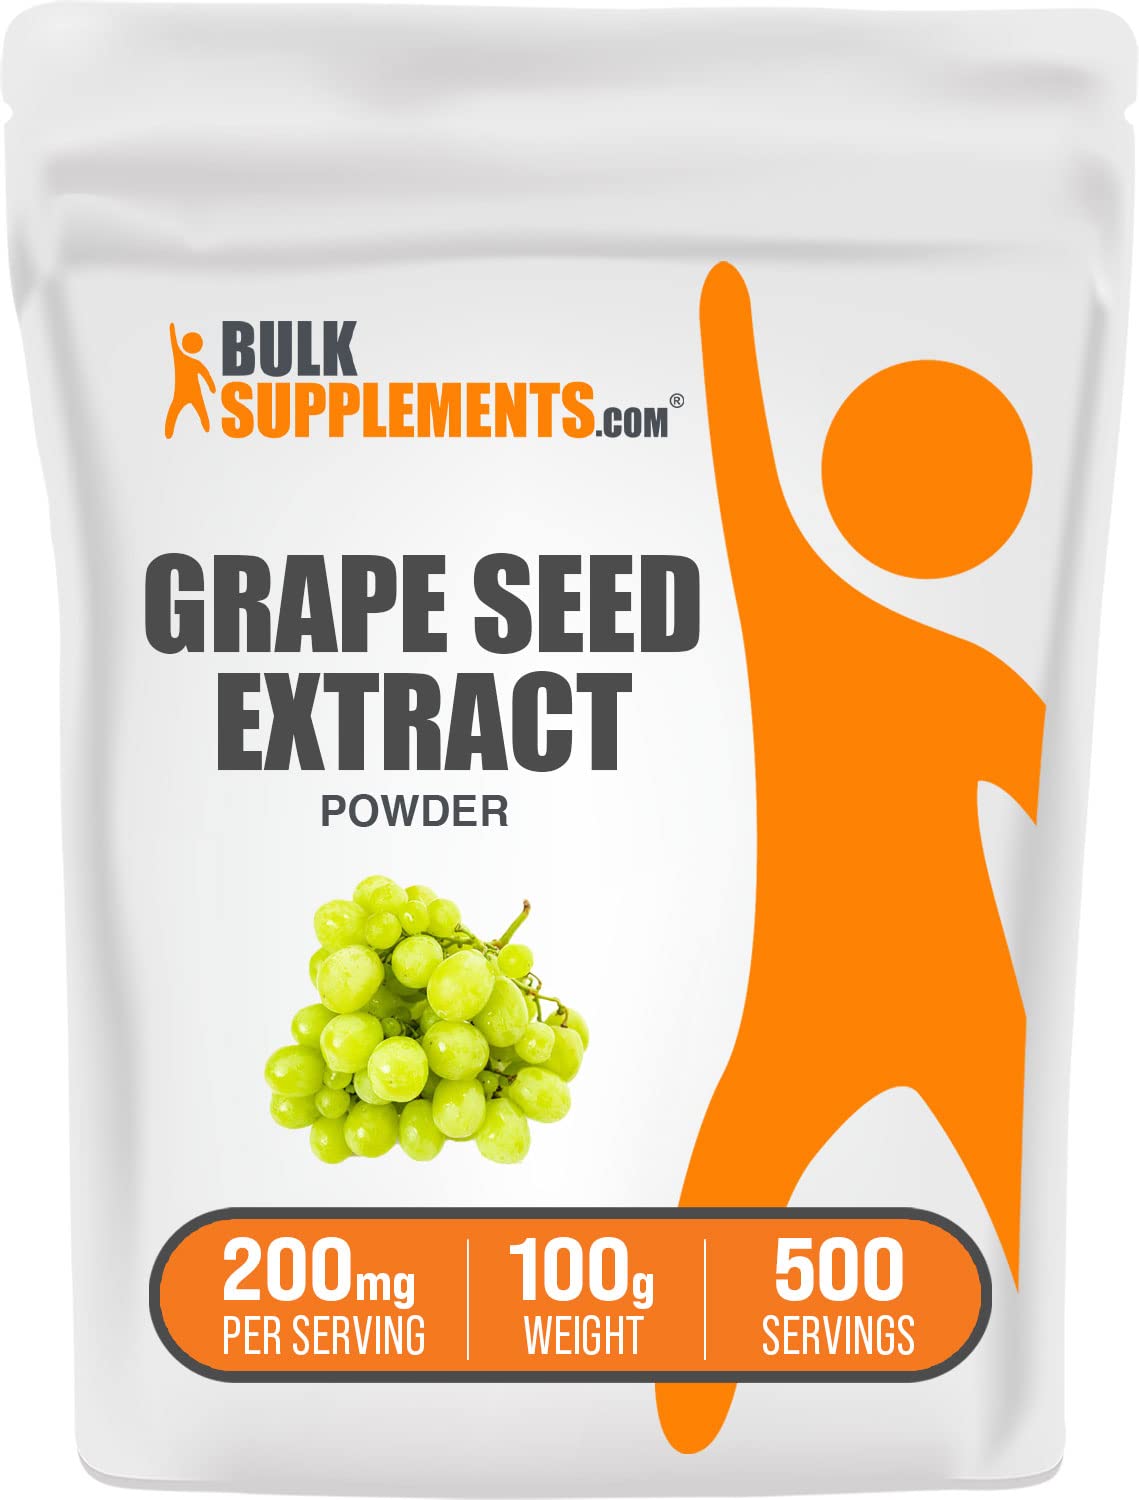 BULKSUPPLEMENTS.COM Grape Seed Extract Powder - Herbal Supplements, Antioxidants Supplement - 200mg of Grapeseed Extract Powder per Serving, Gluten Free (100 Grams - 3.5 oz)